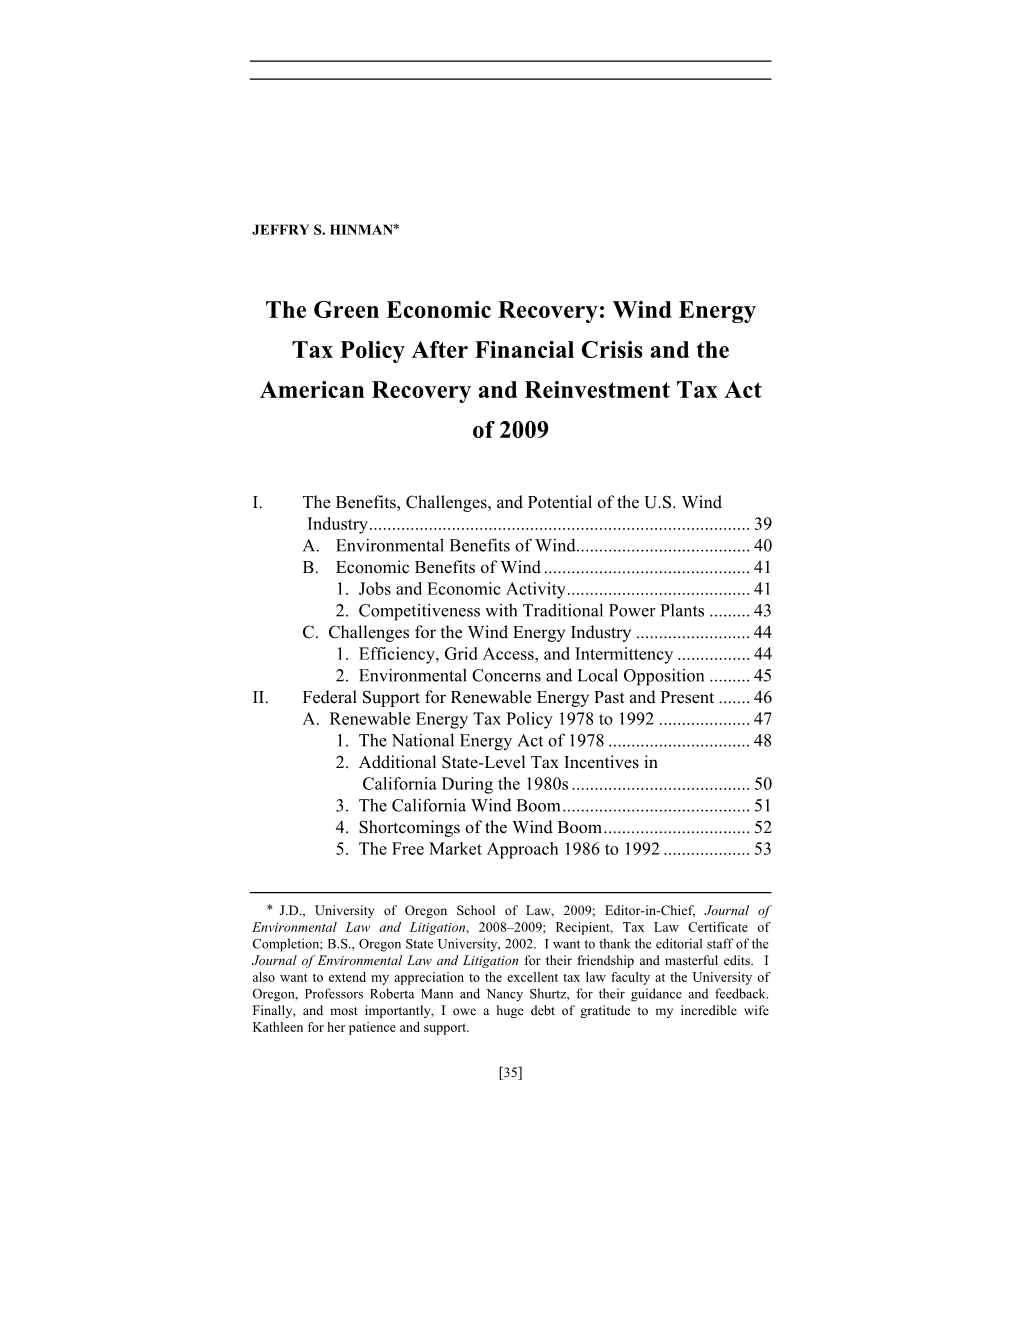 The Green Economic Recovery: Wind Energy Tax Policy After Financial Crisis and the American Recovery and Reinvestment Tax Act of 2009